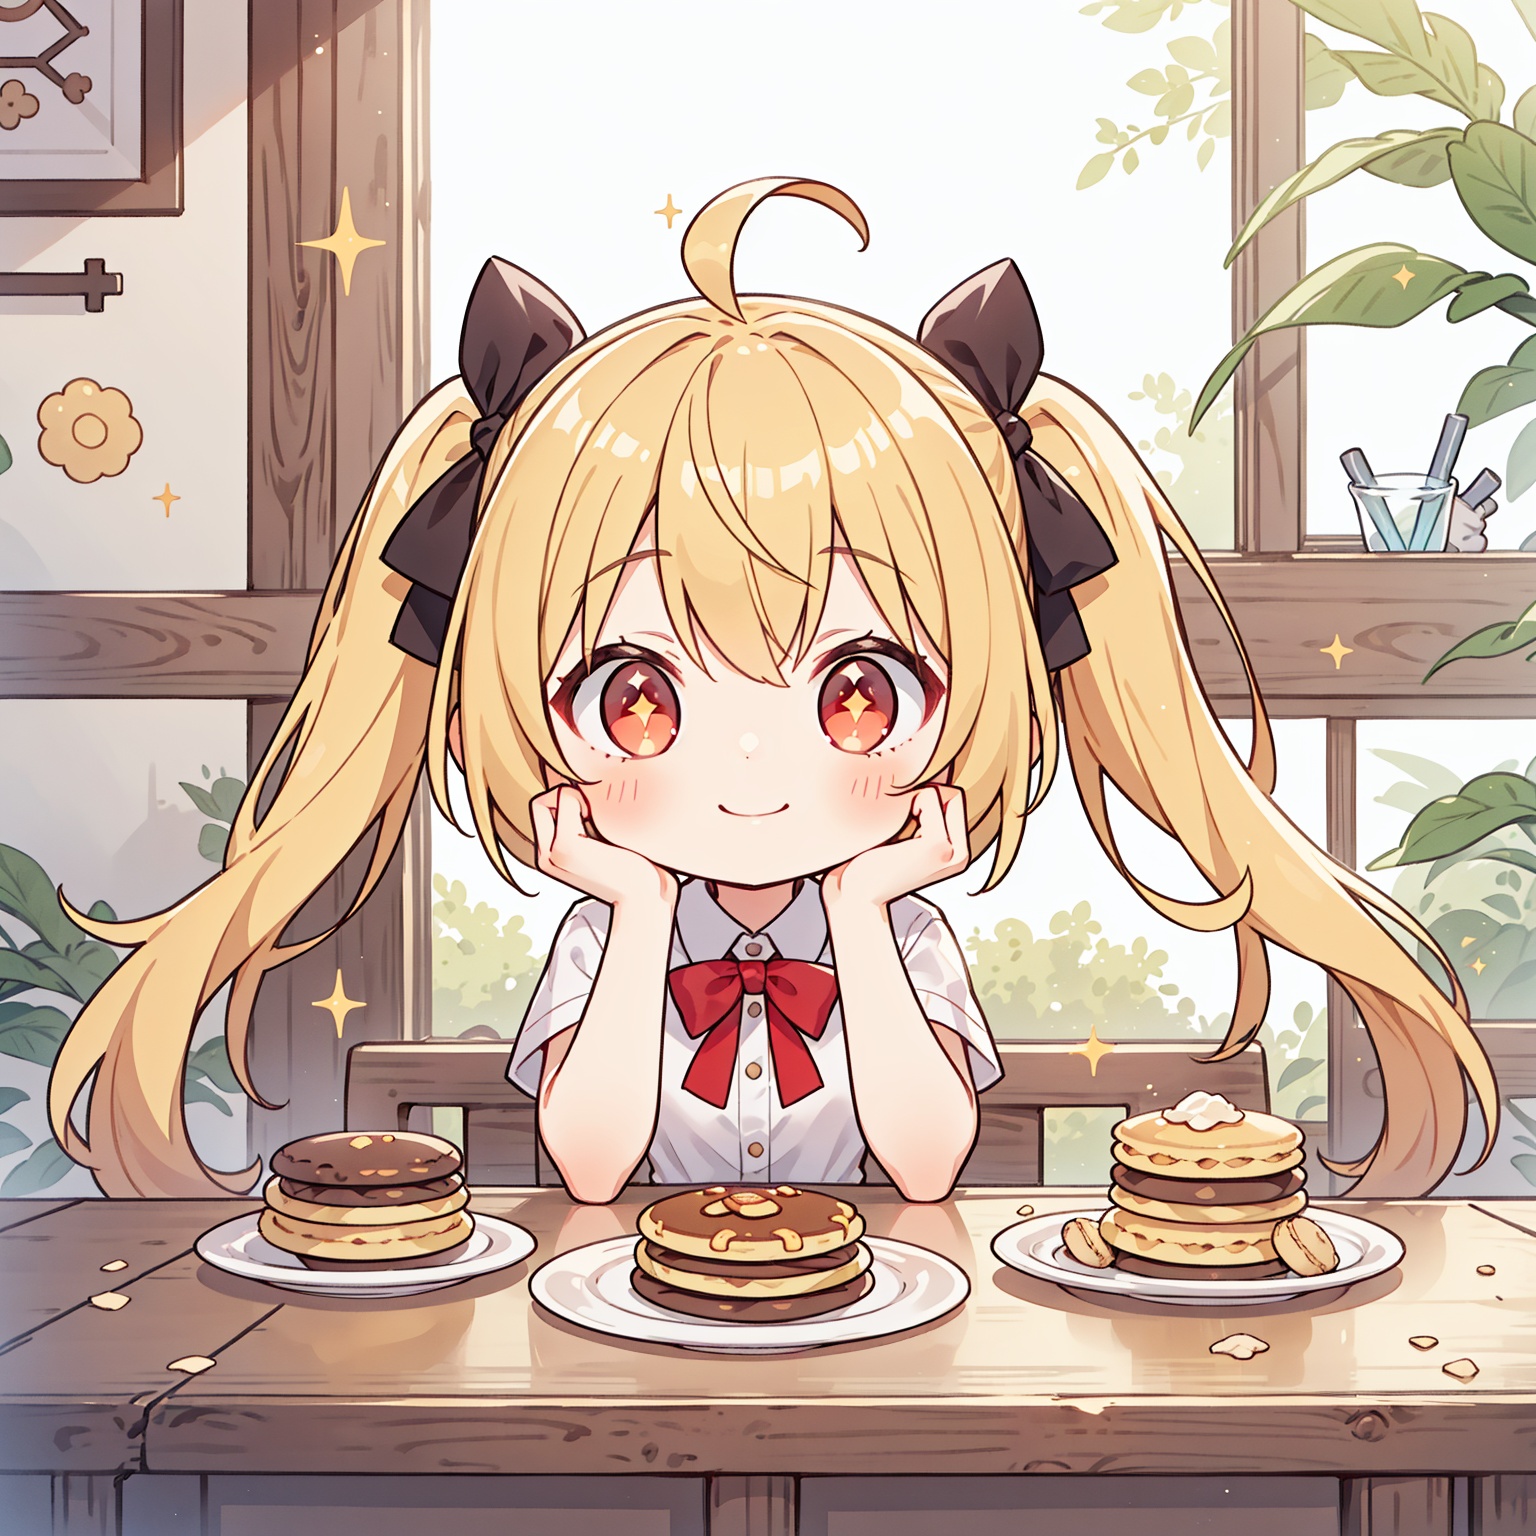 1girl,sitting,hands on face,(elbow on the table),table,pupils sparkling,smiling,depth of field,wind,floating,hair,shirt,upper_body,ahoge,bow,hair ribbon,yellow hair,red eyes,twintails,bangs,glass of drink,cookies, macarons,indoors,pancake, dishes